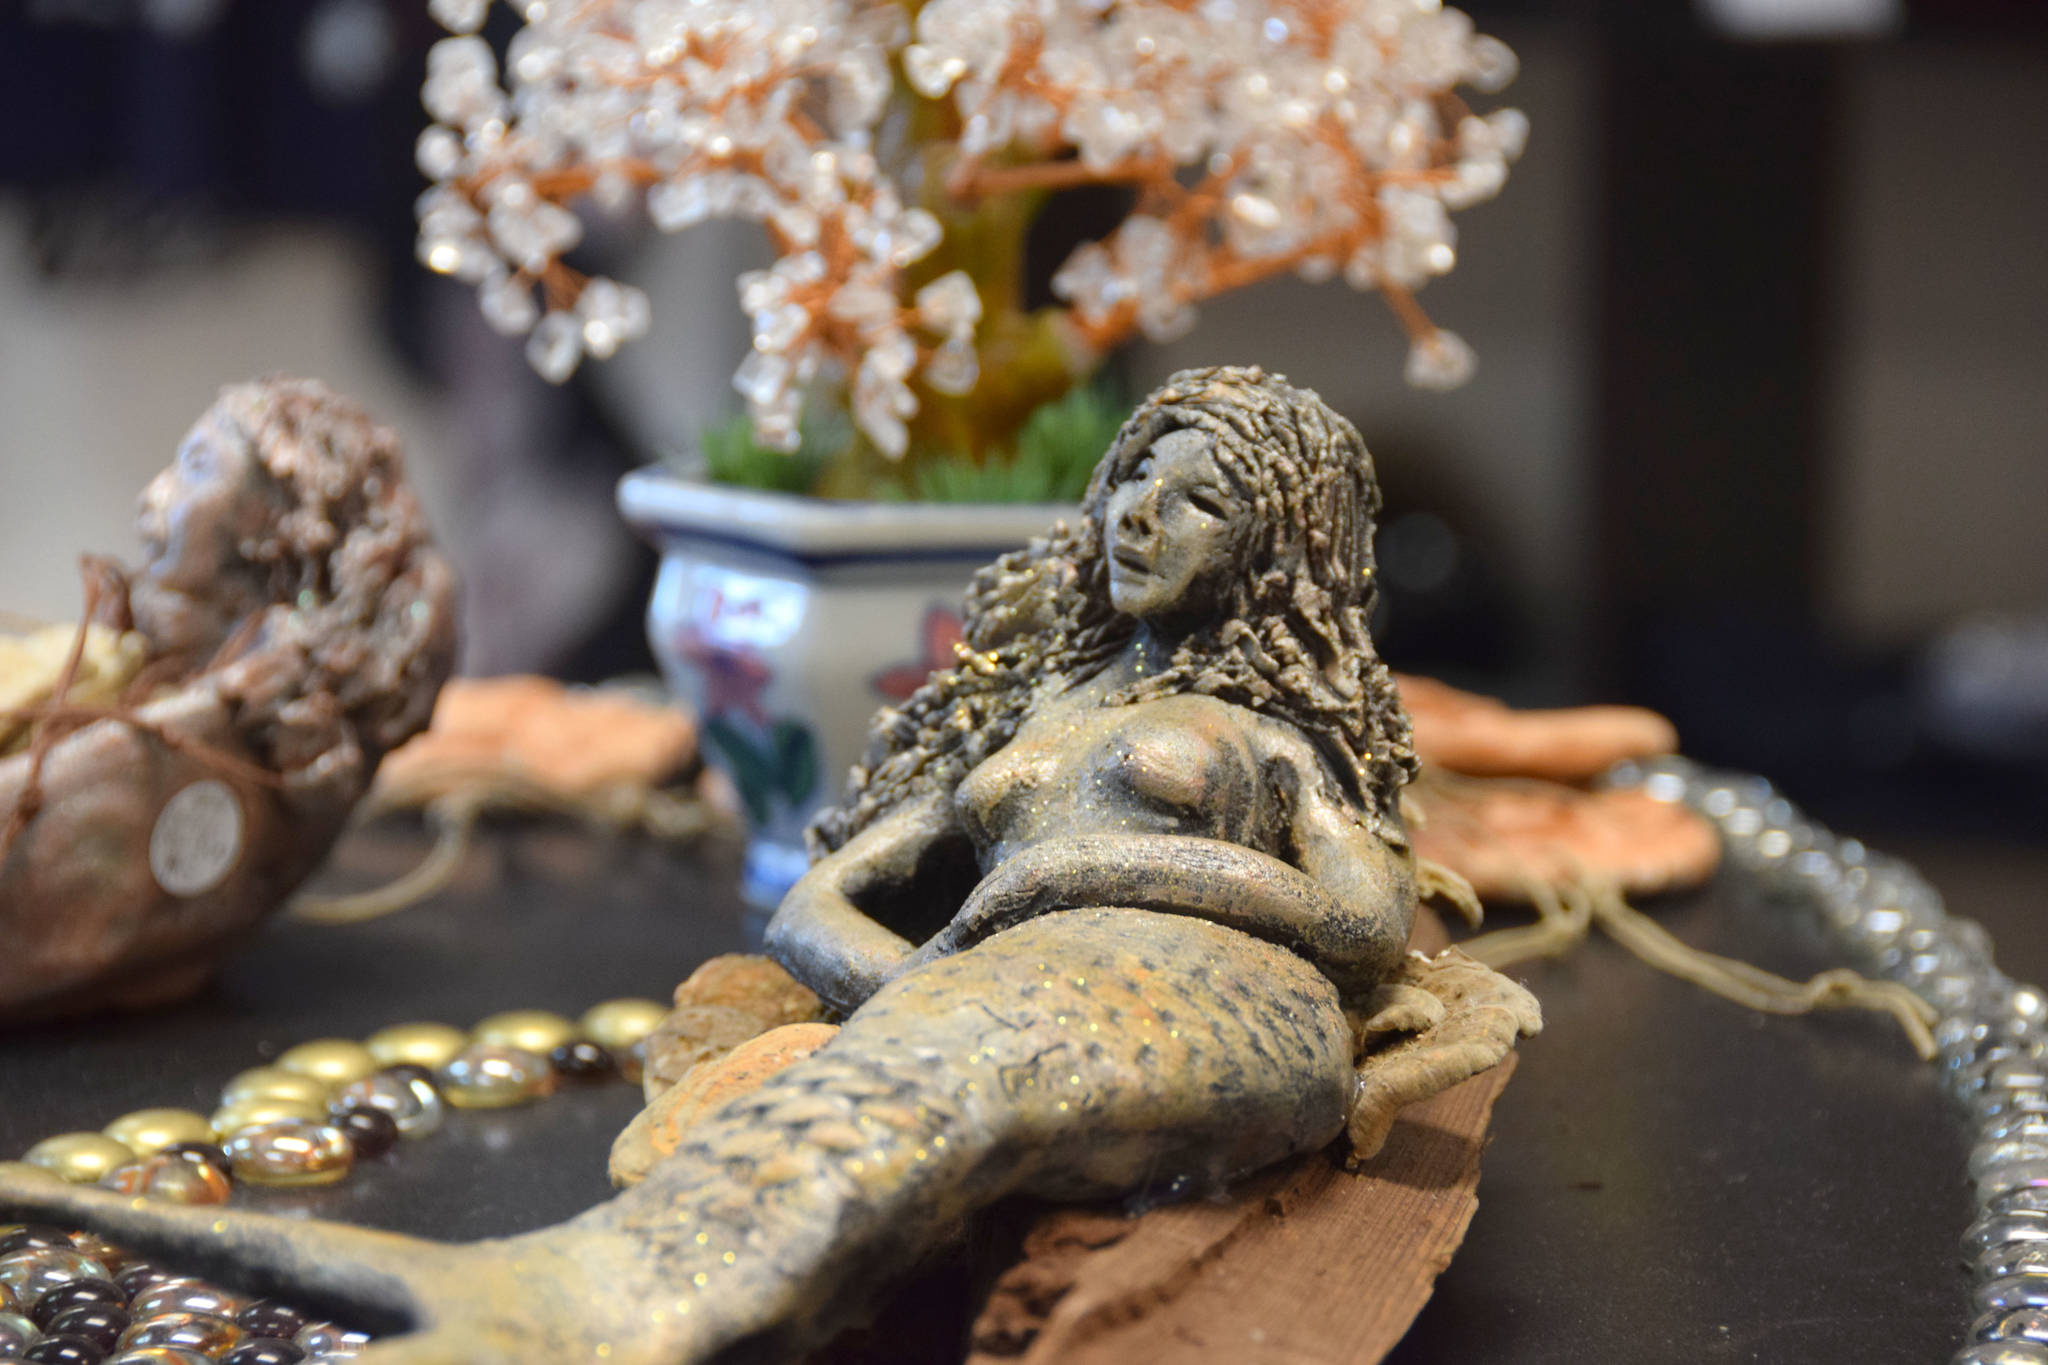 A mermaid carving sits on display at the Positive Vibe gallery in Kenai on Wednesday, Jan. 30, 2019. (Photo by Brian Mazurek/Peninsula Clarion)